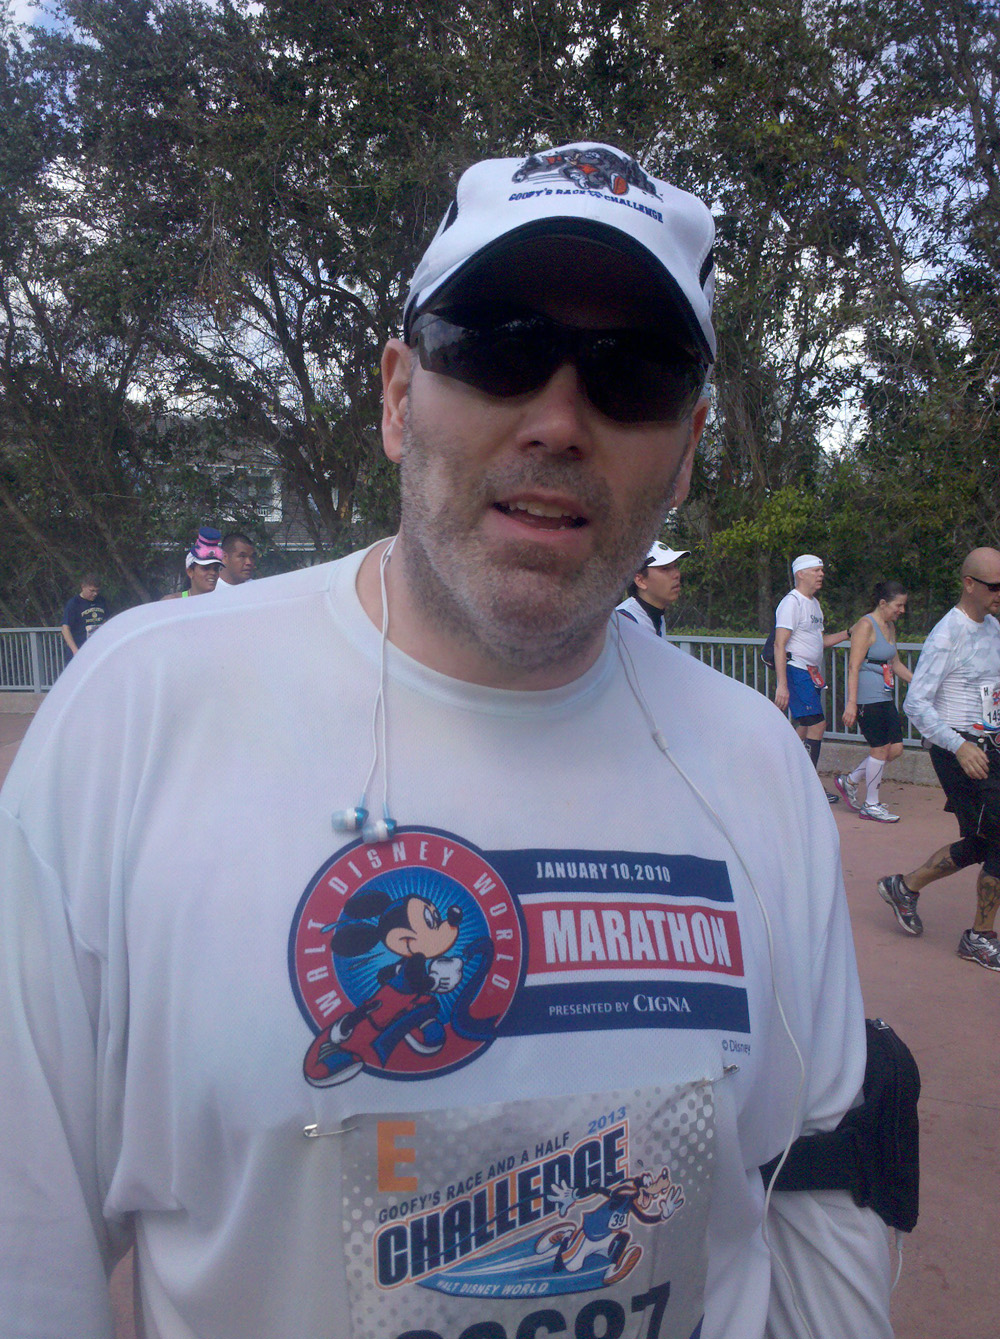 me just before entering Epcot with about 1.5 miles to go